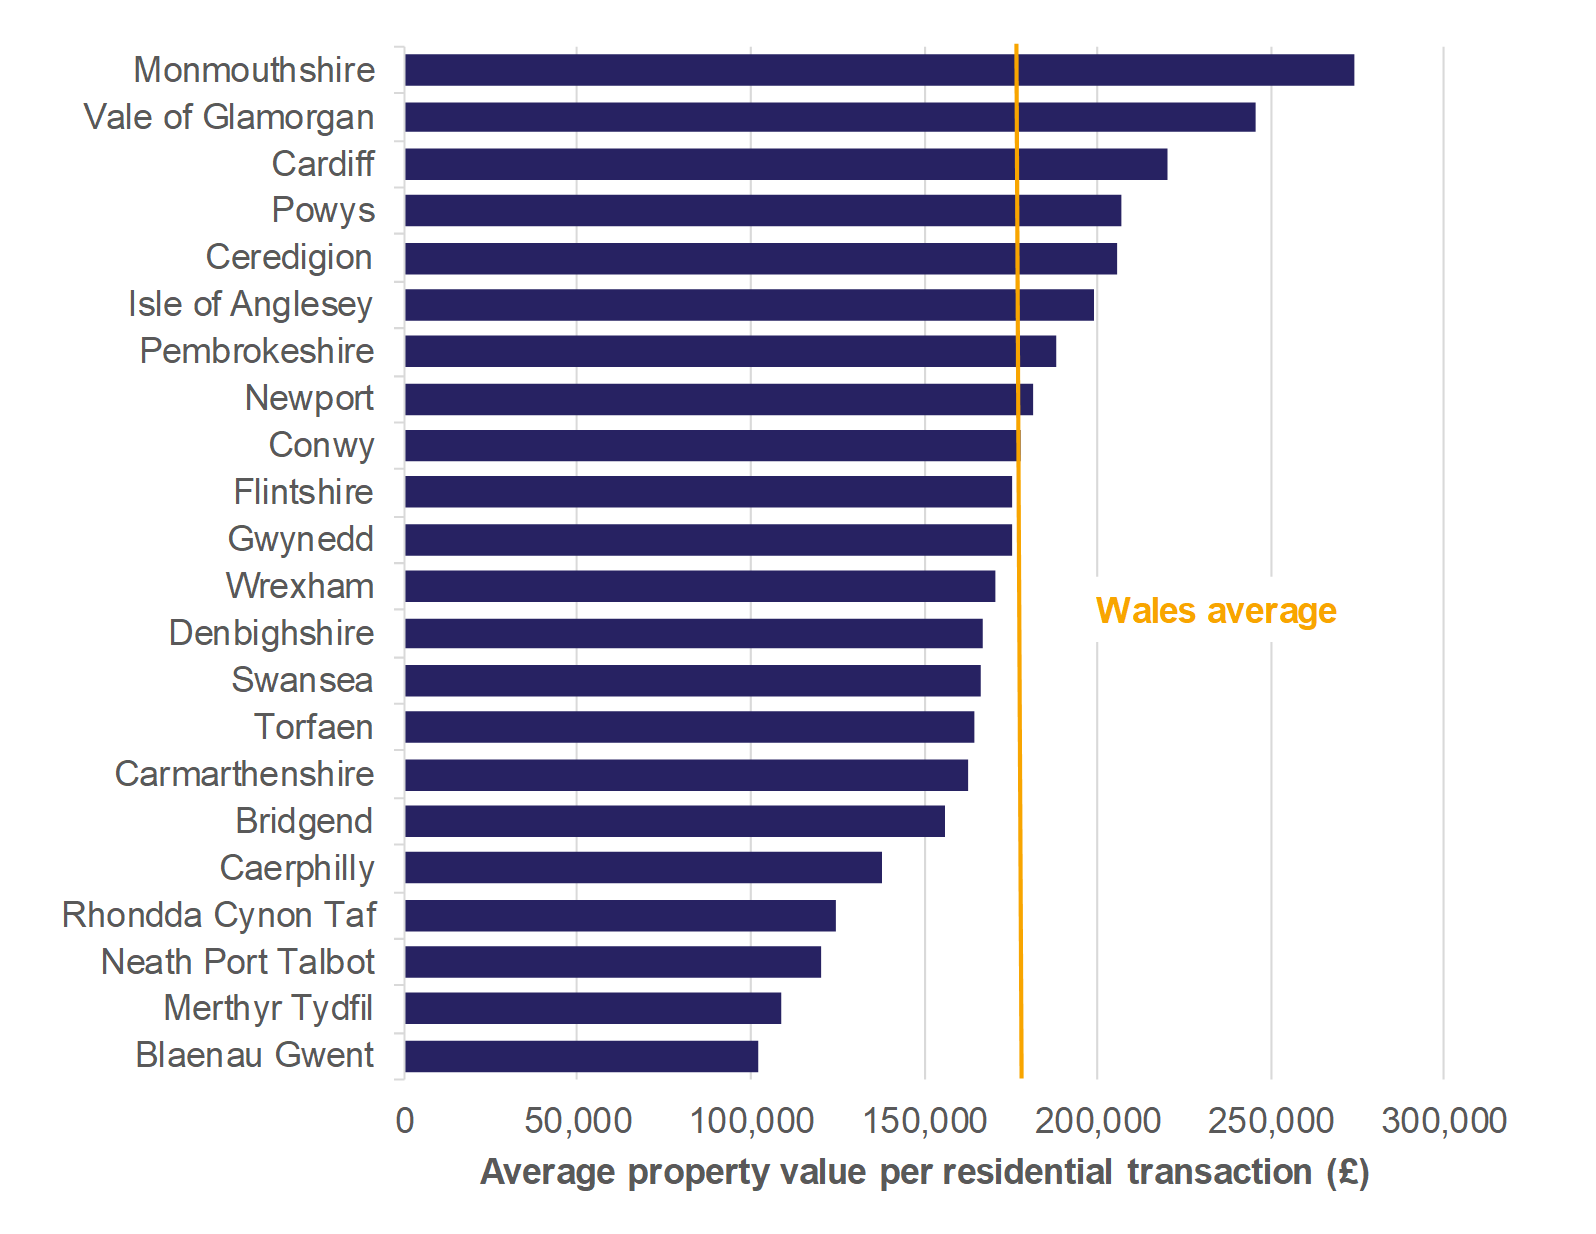 Figure 8.4 shows the average property value per residential transaction, for all local authorities and a Wales average.